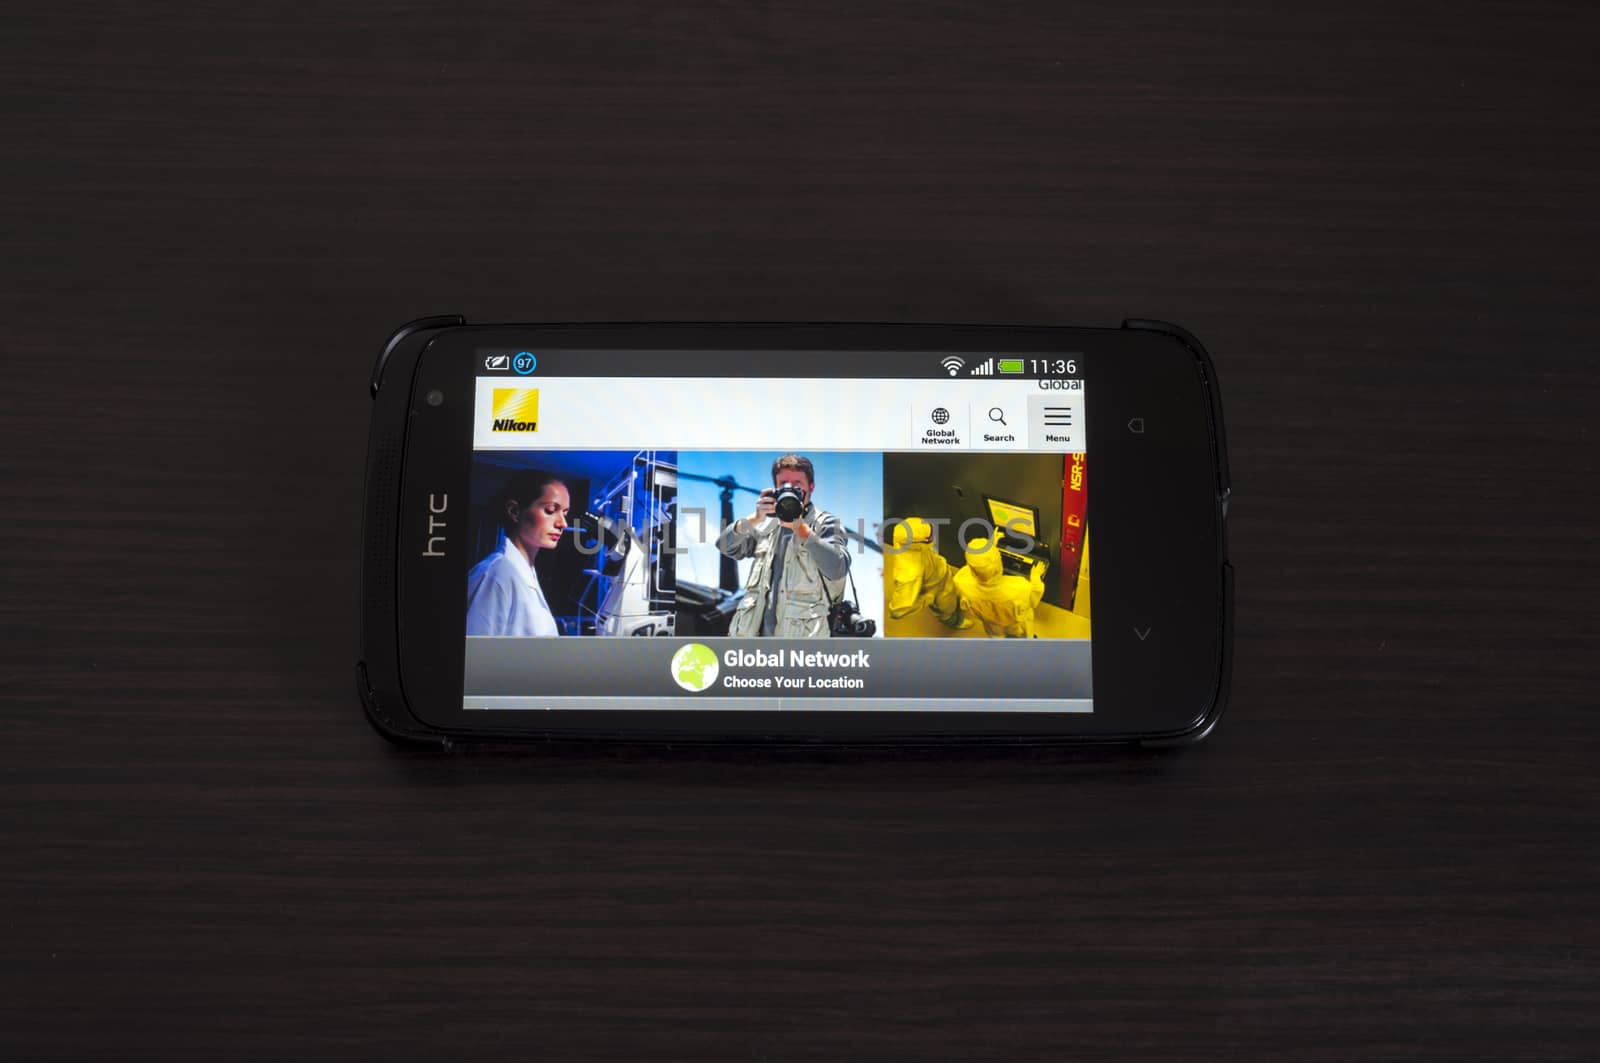 Bucharest, Romania - February 05, 2014: Photo of a HTC Desire device, showing the Nikon web page. Nikon Corporation, is a Japanese multinational corporation, specializing in optics and imaging products